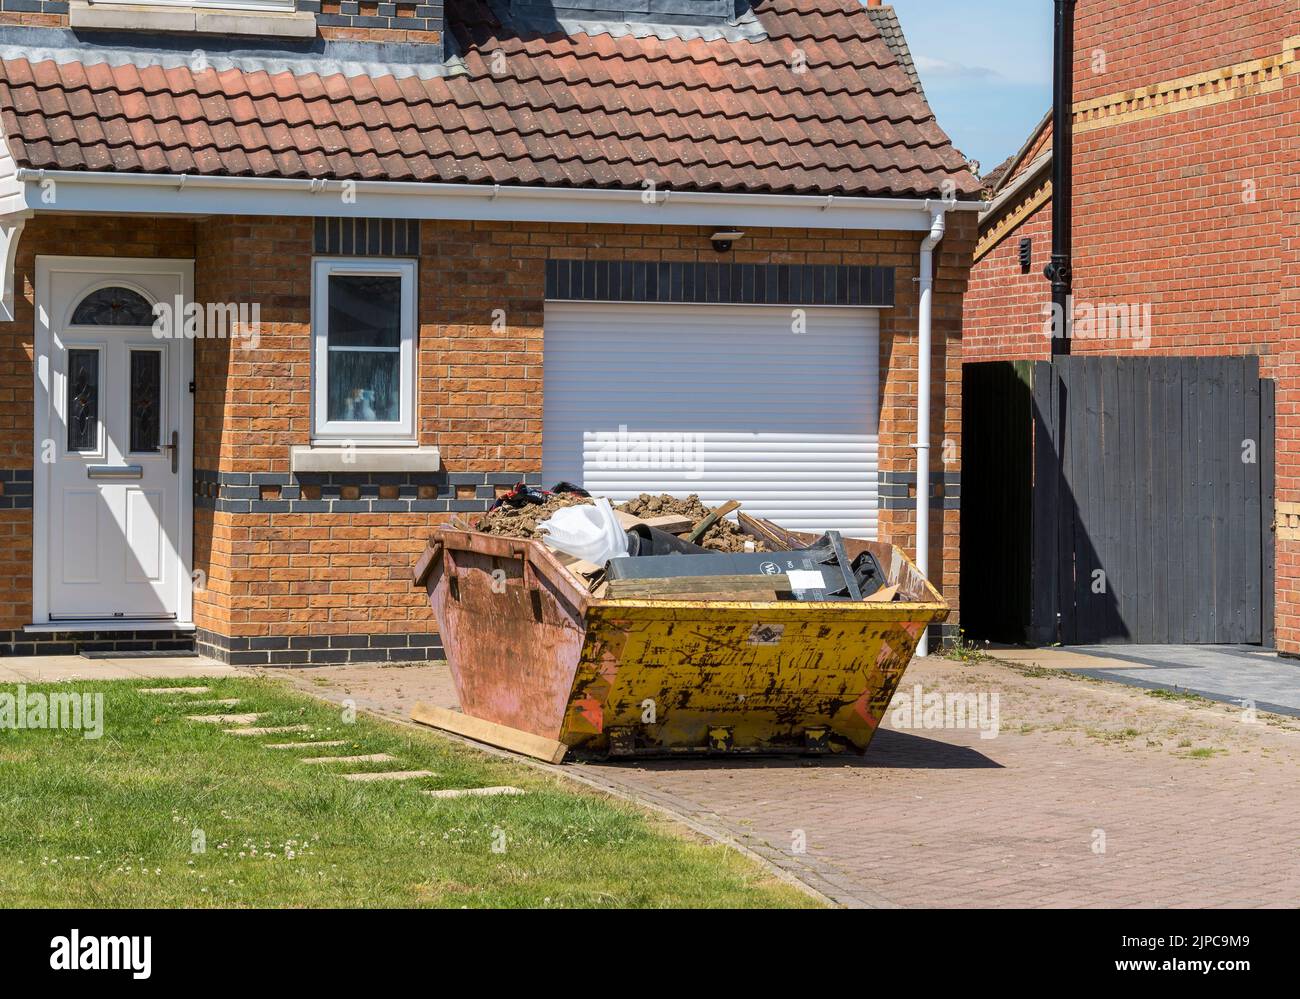 Rubbish skip on front drive awaiting collection Stock Photo